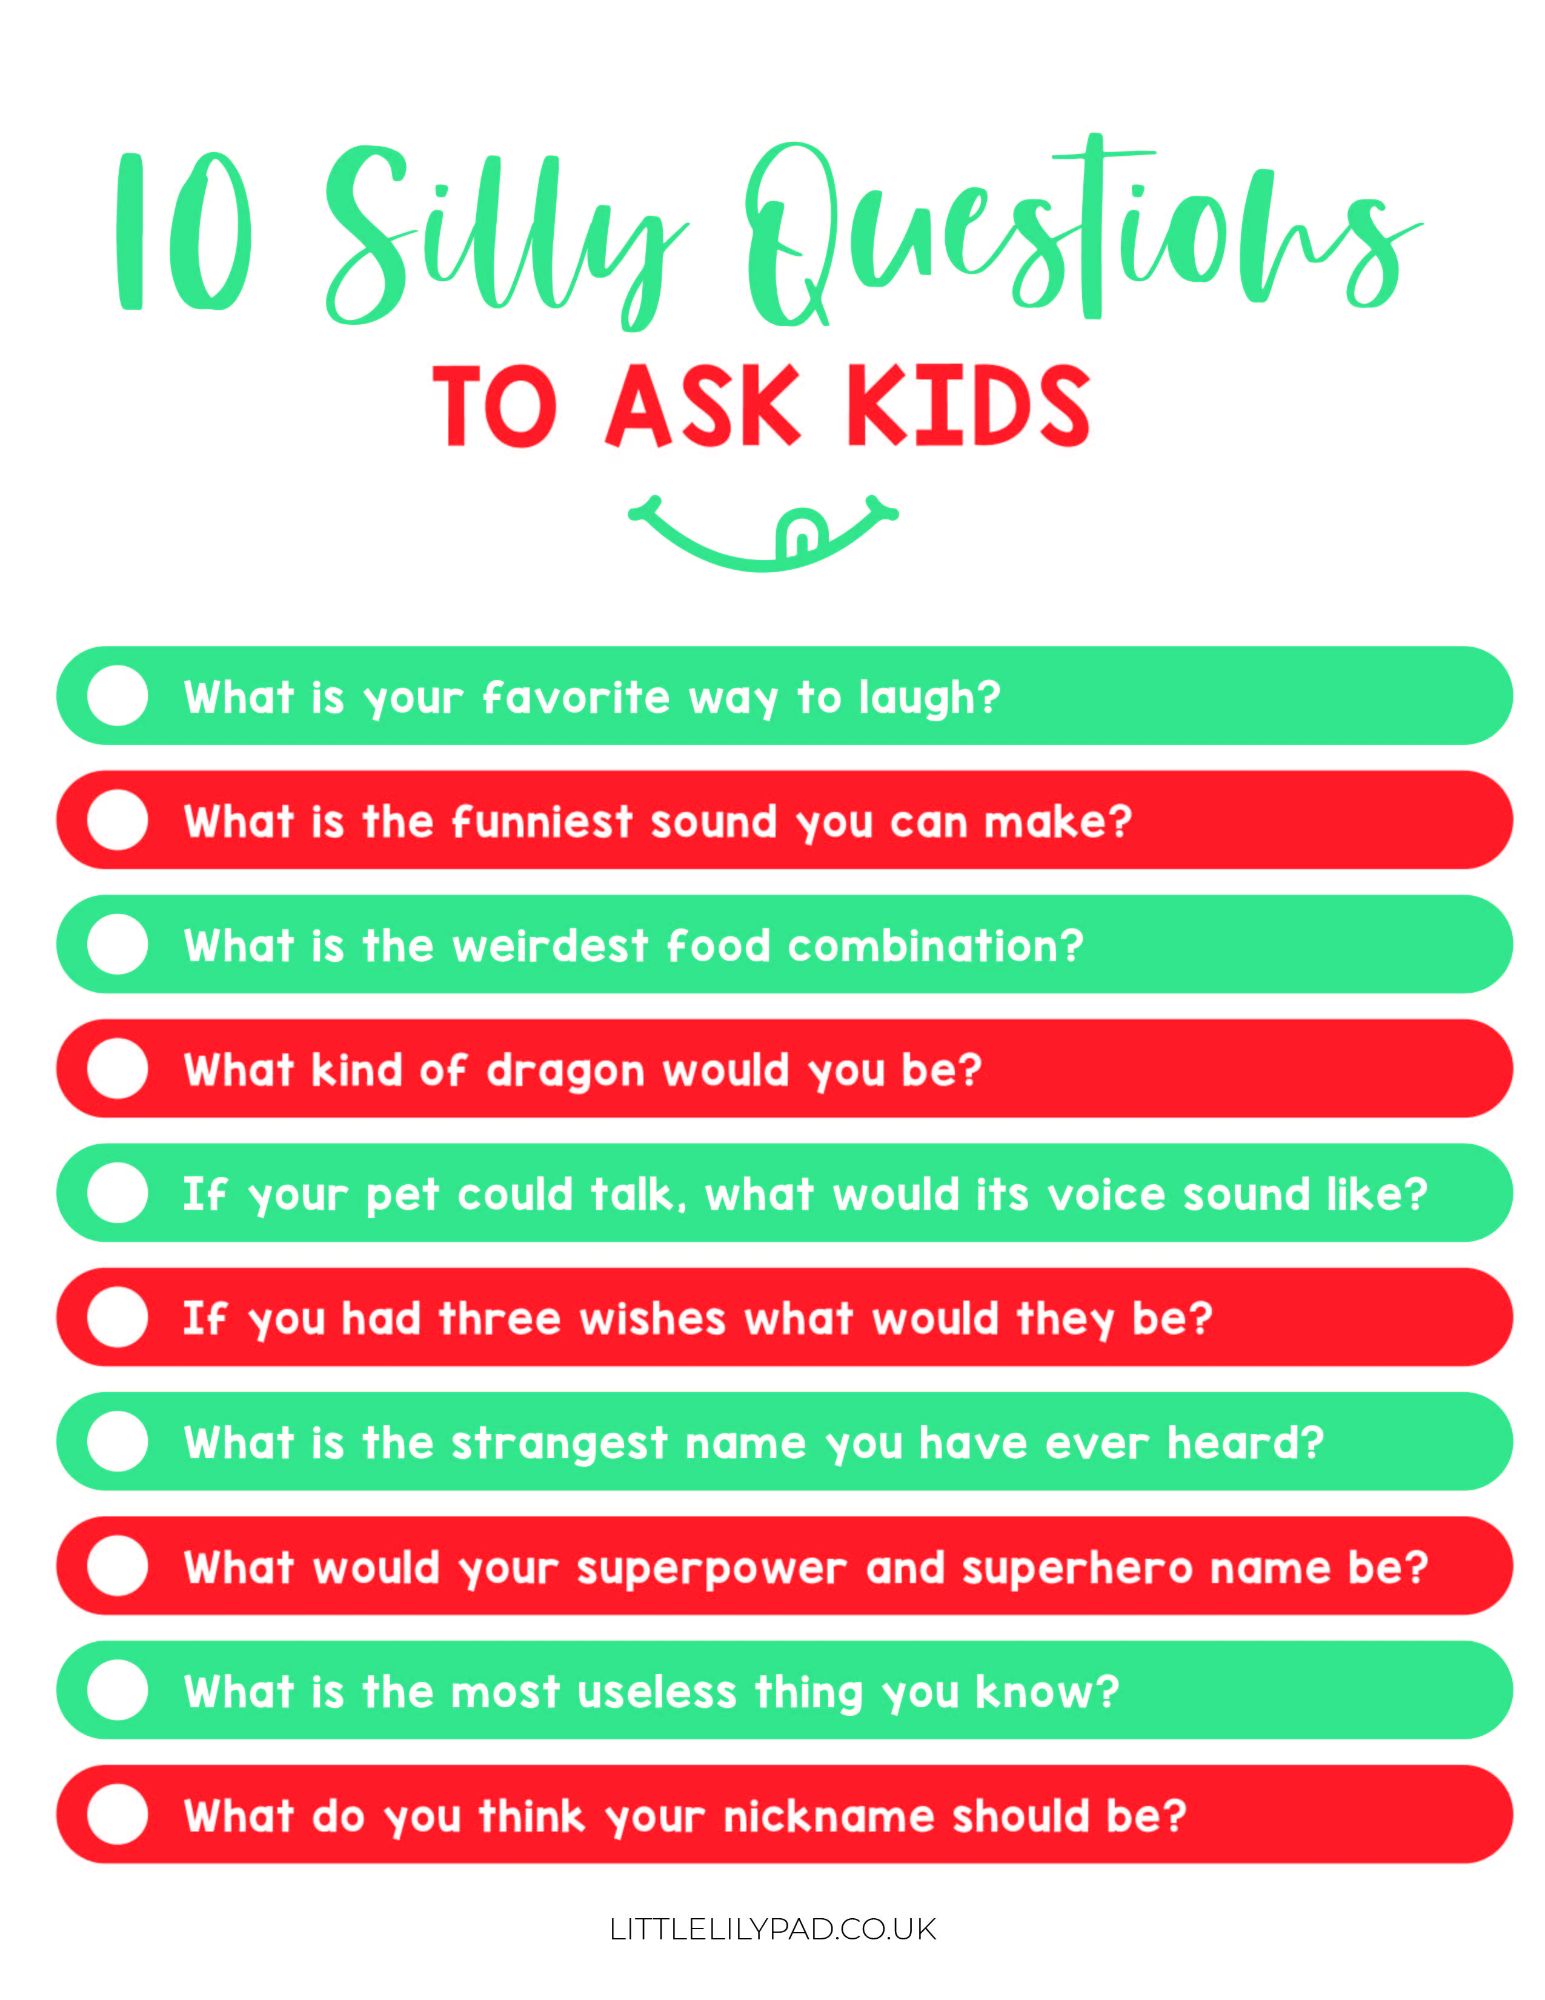 Lockdown fun ideas for kids : questions to ask children over dinner